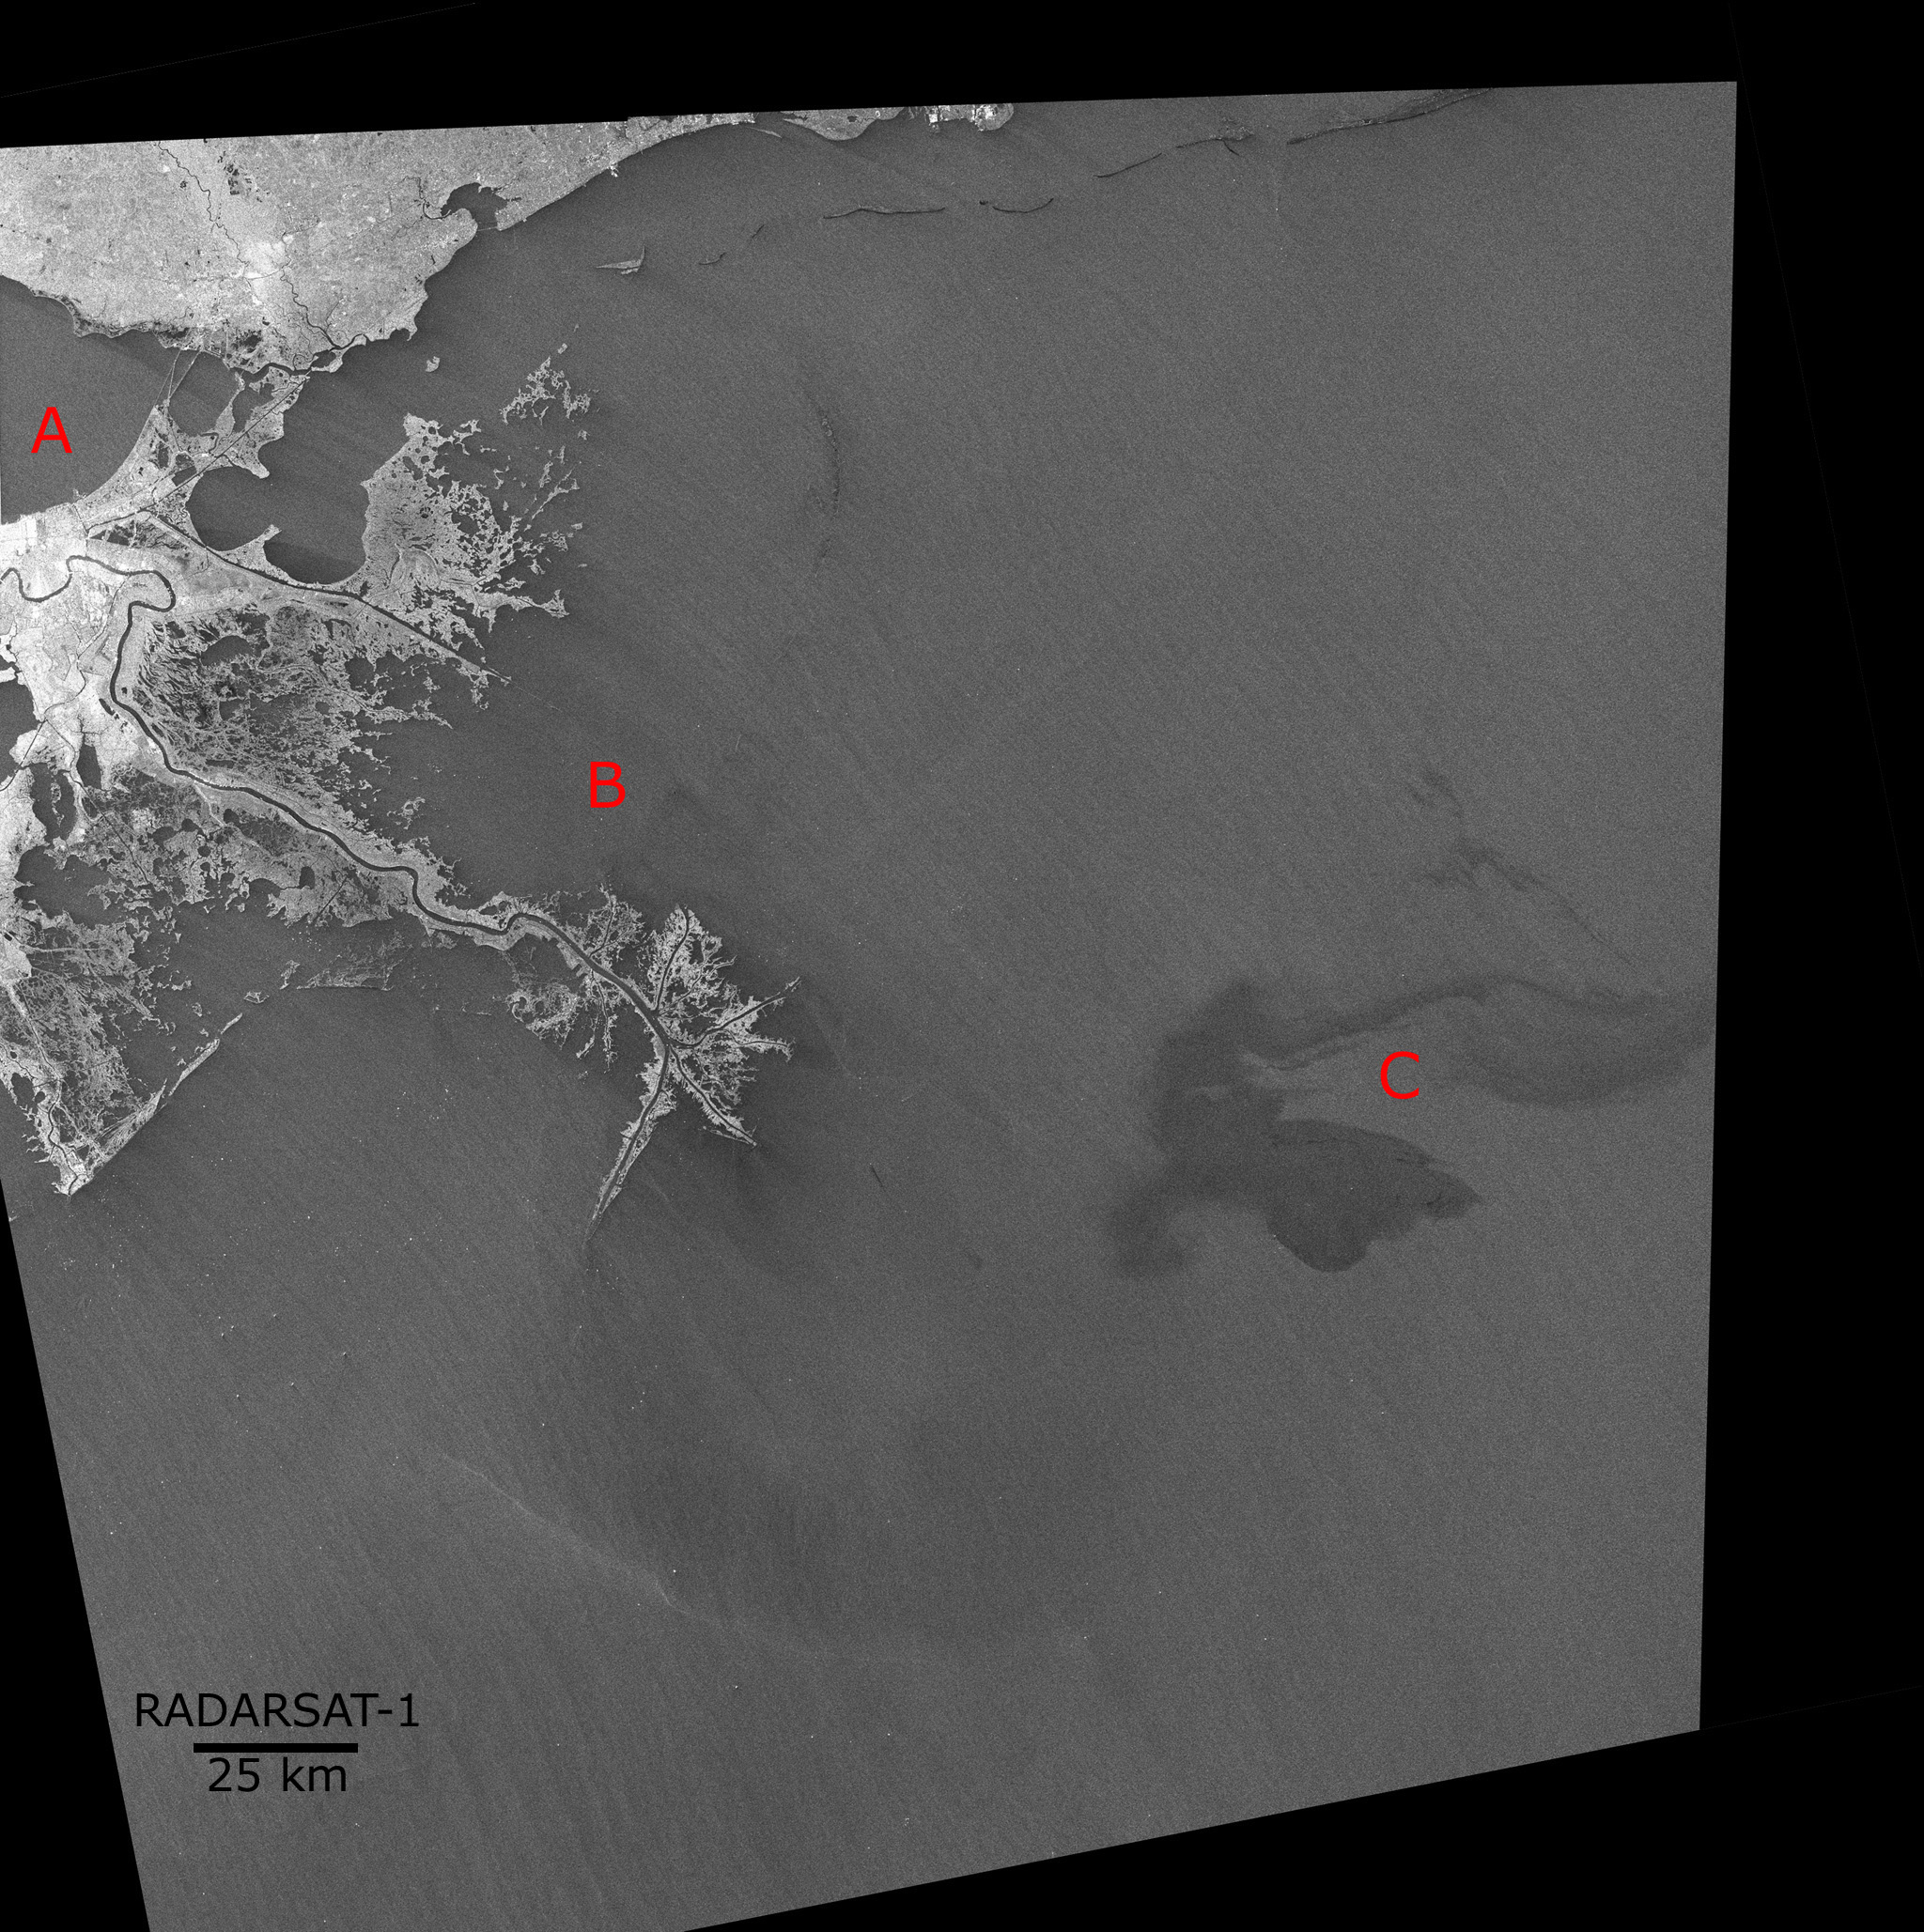 Map showing the oil spill in the Gulf of Mexico - Image acquired by RADARSAT-1 ScanSAR April 26, 2010.